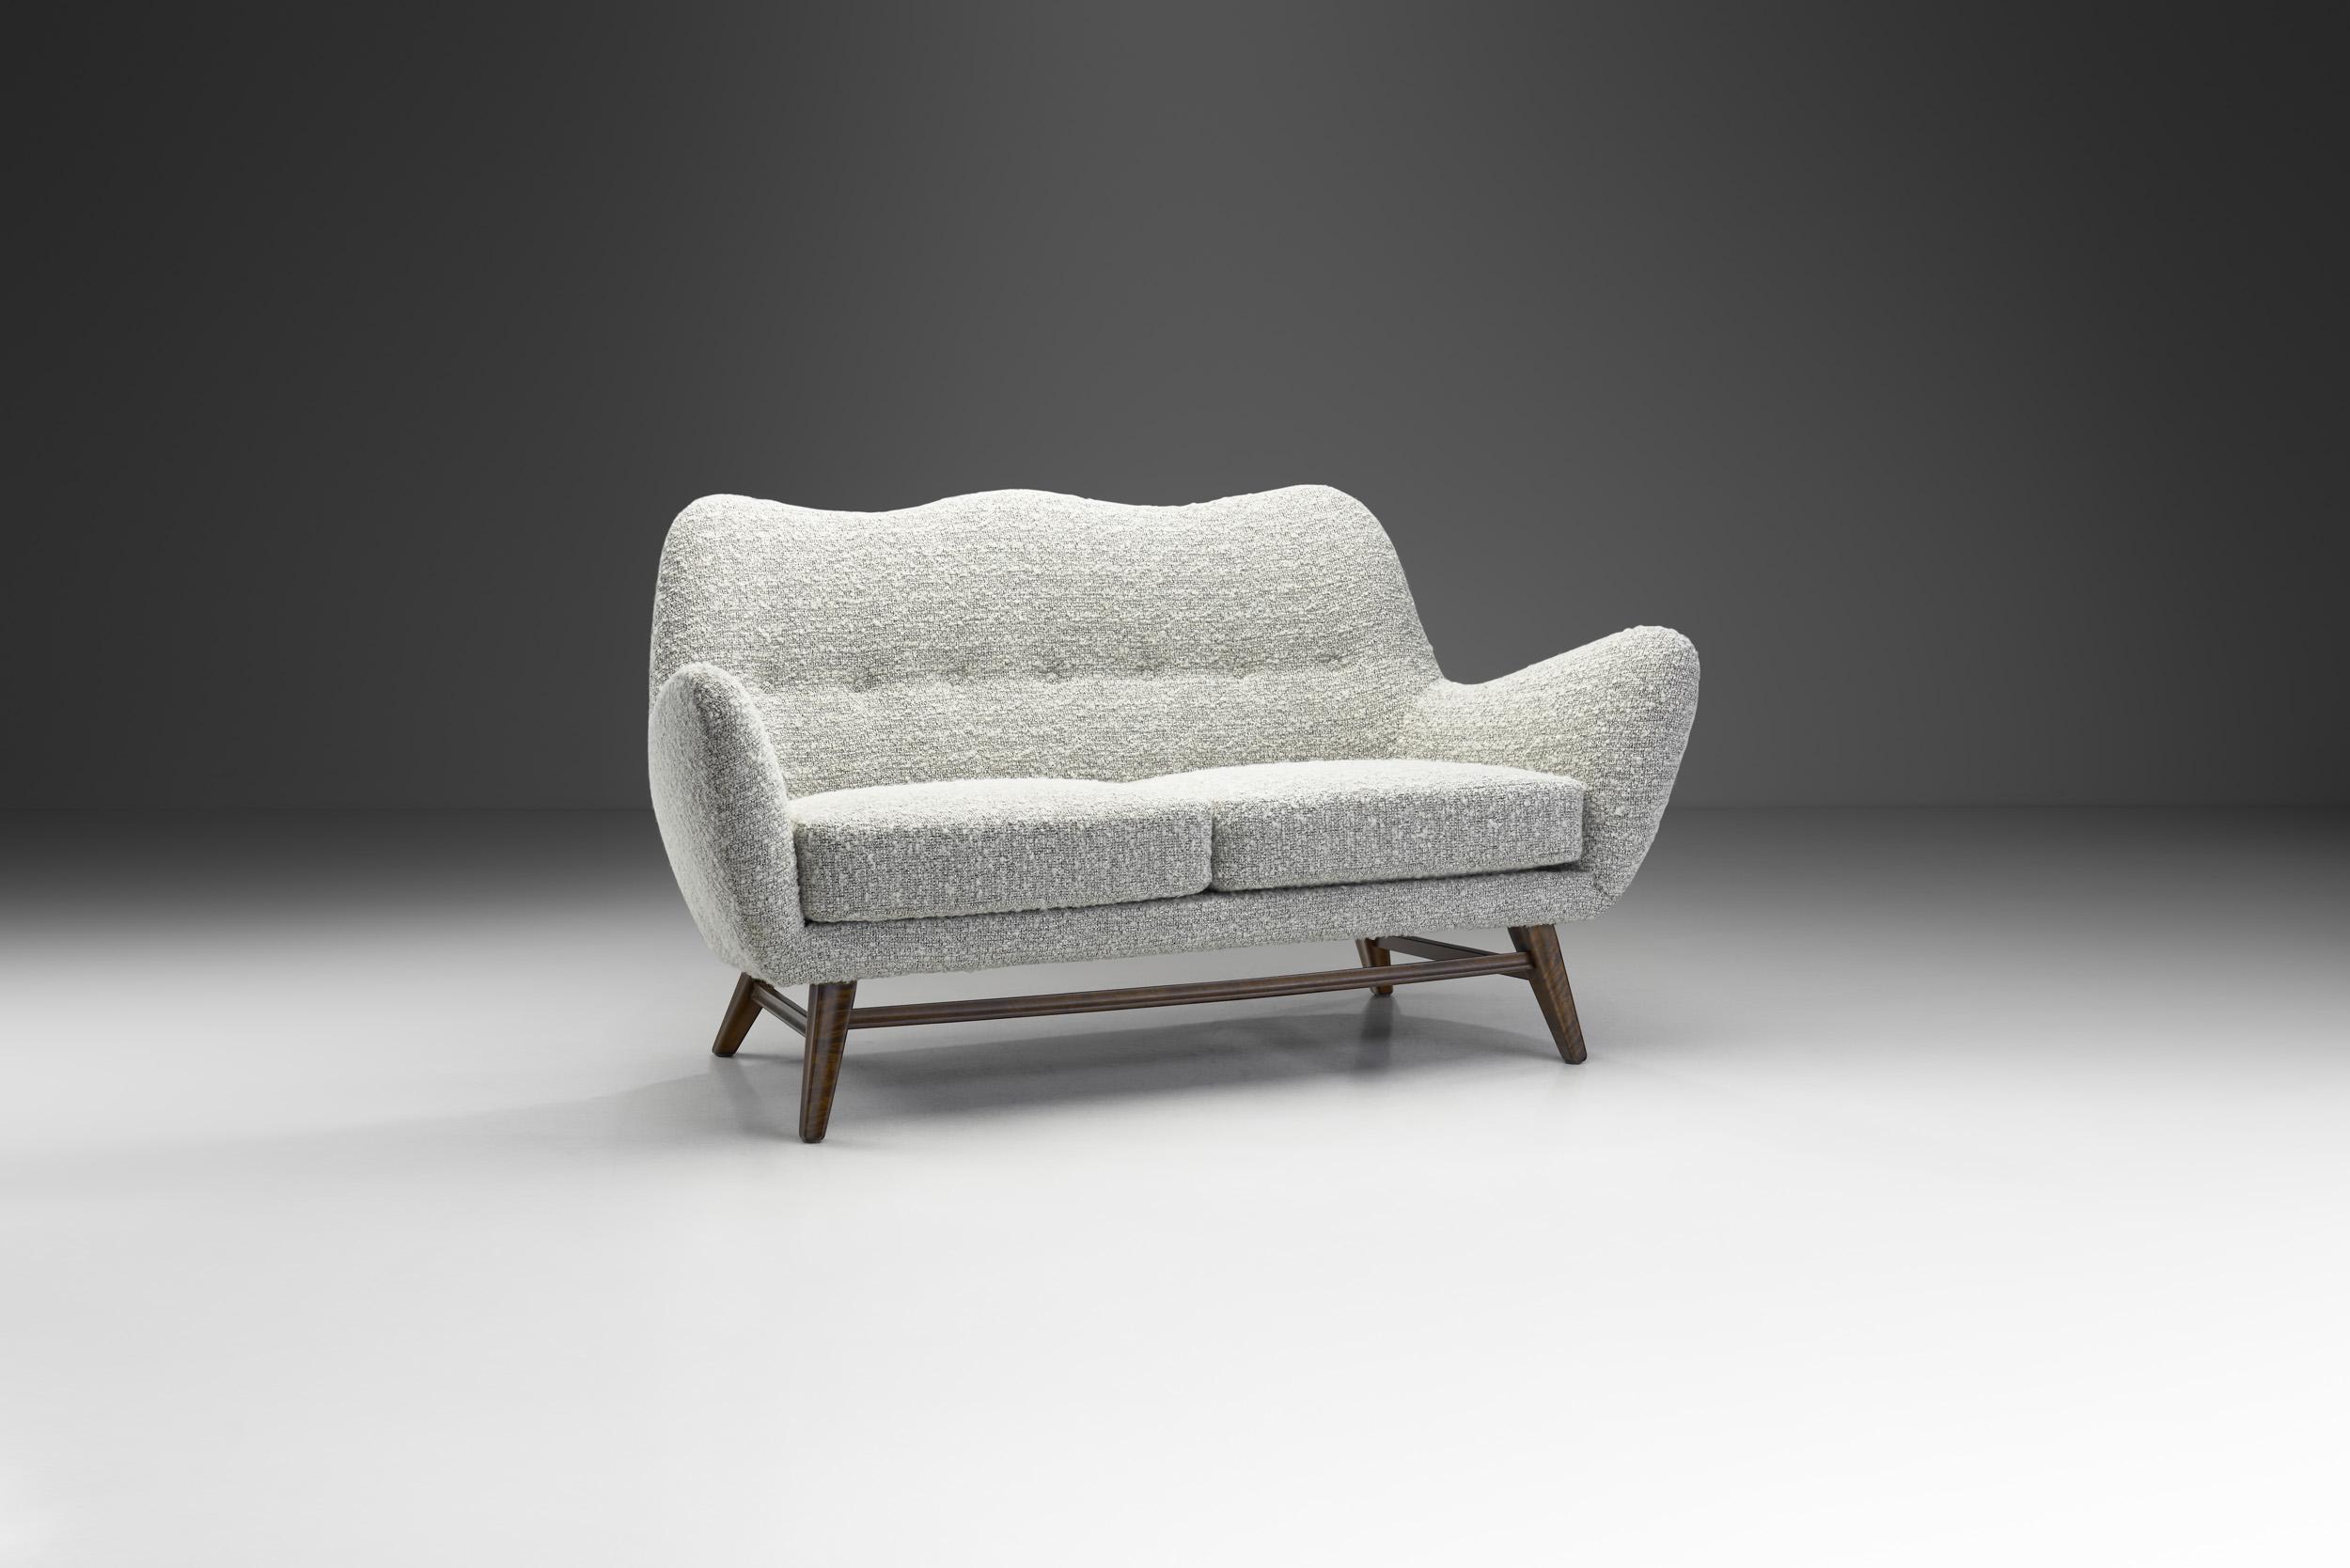 While a sofa with a rounded shape is not ground-breaking, it has typically been reserved for people who could afford to choose an artistic style over a practical one. That is, until Nordic designers and cabinetmakers came to the picture. Nordic